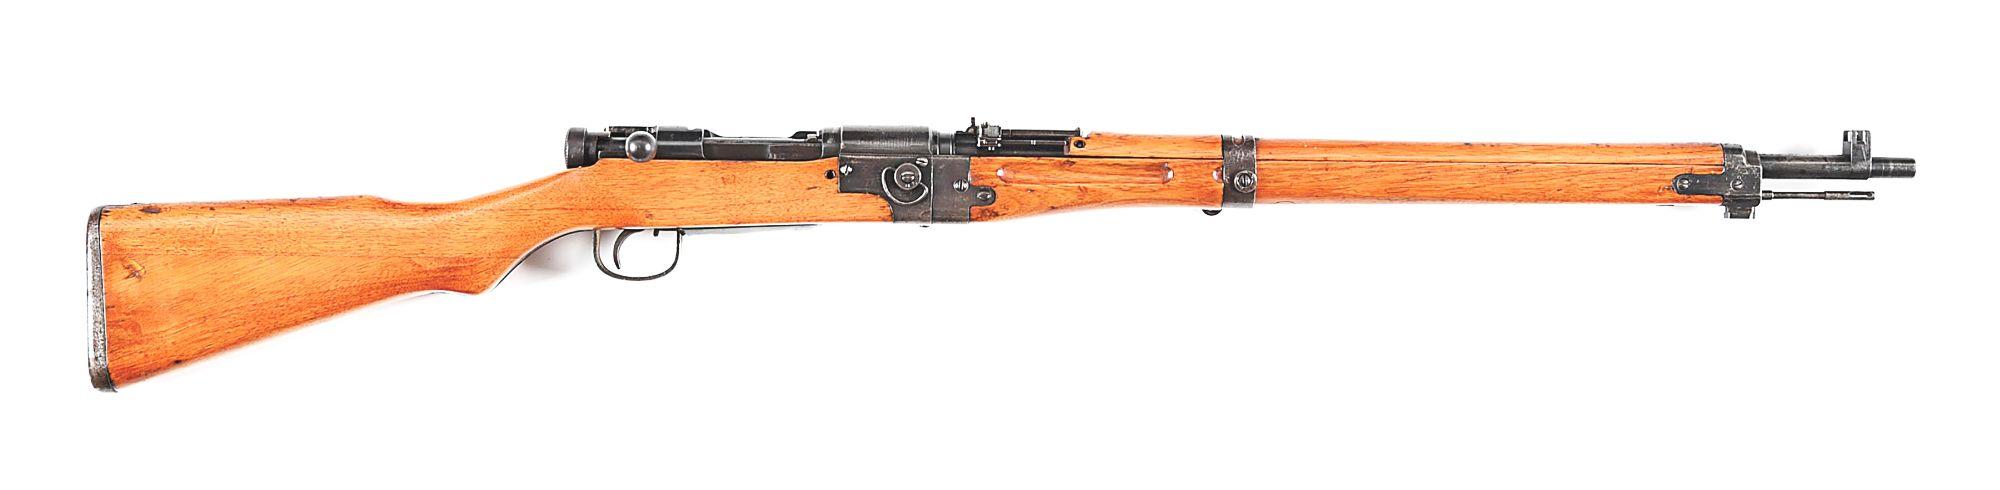 (C) NICE EARLY NAGOYA TYPE 2 PARATROOPER BOLT ACTION RIFLE.